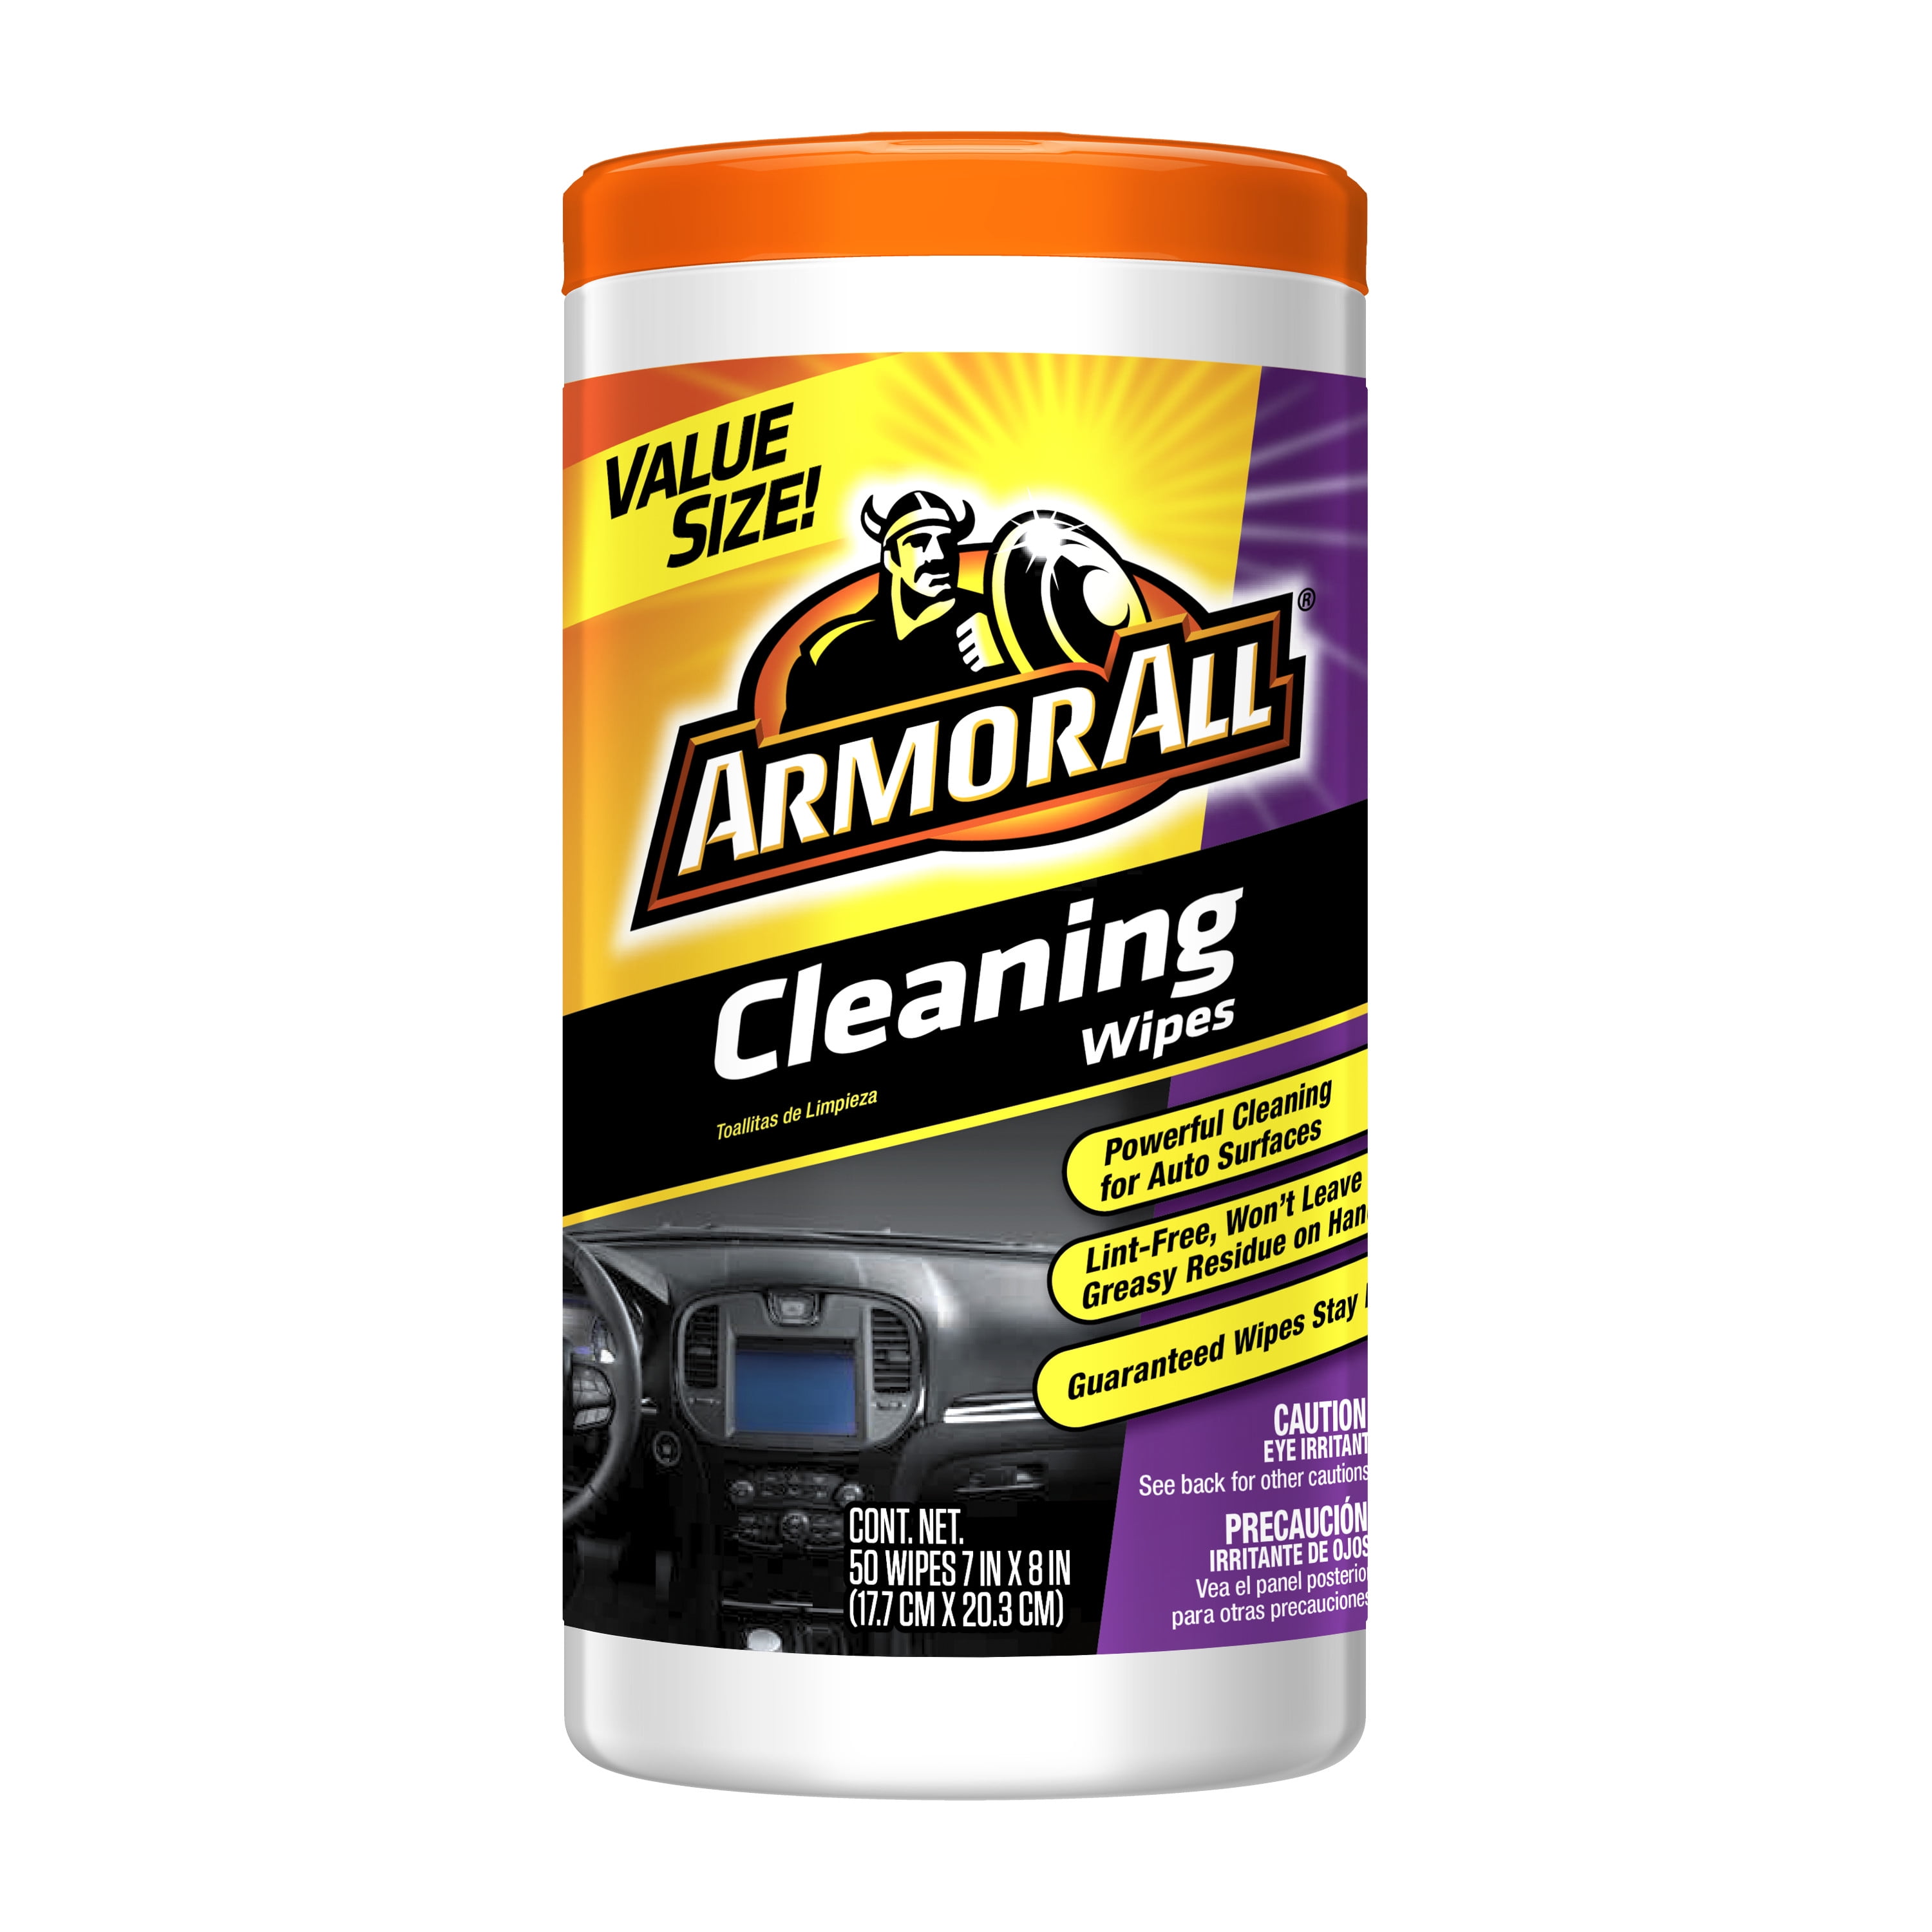 Armor All New Car Scent Air Freshening Car Protectant Wipes (25